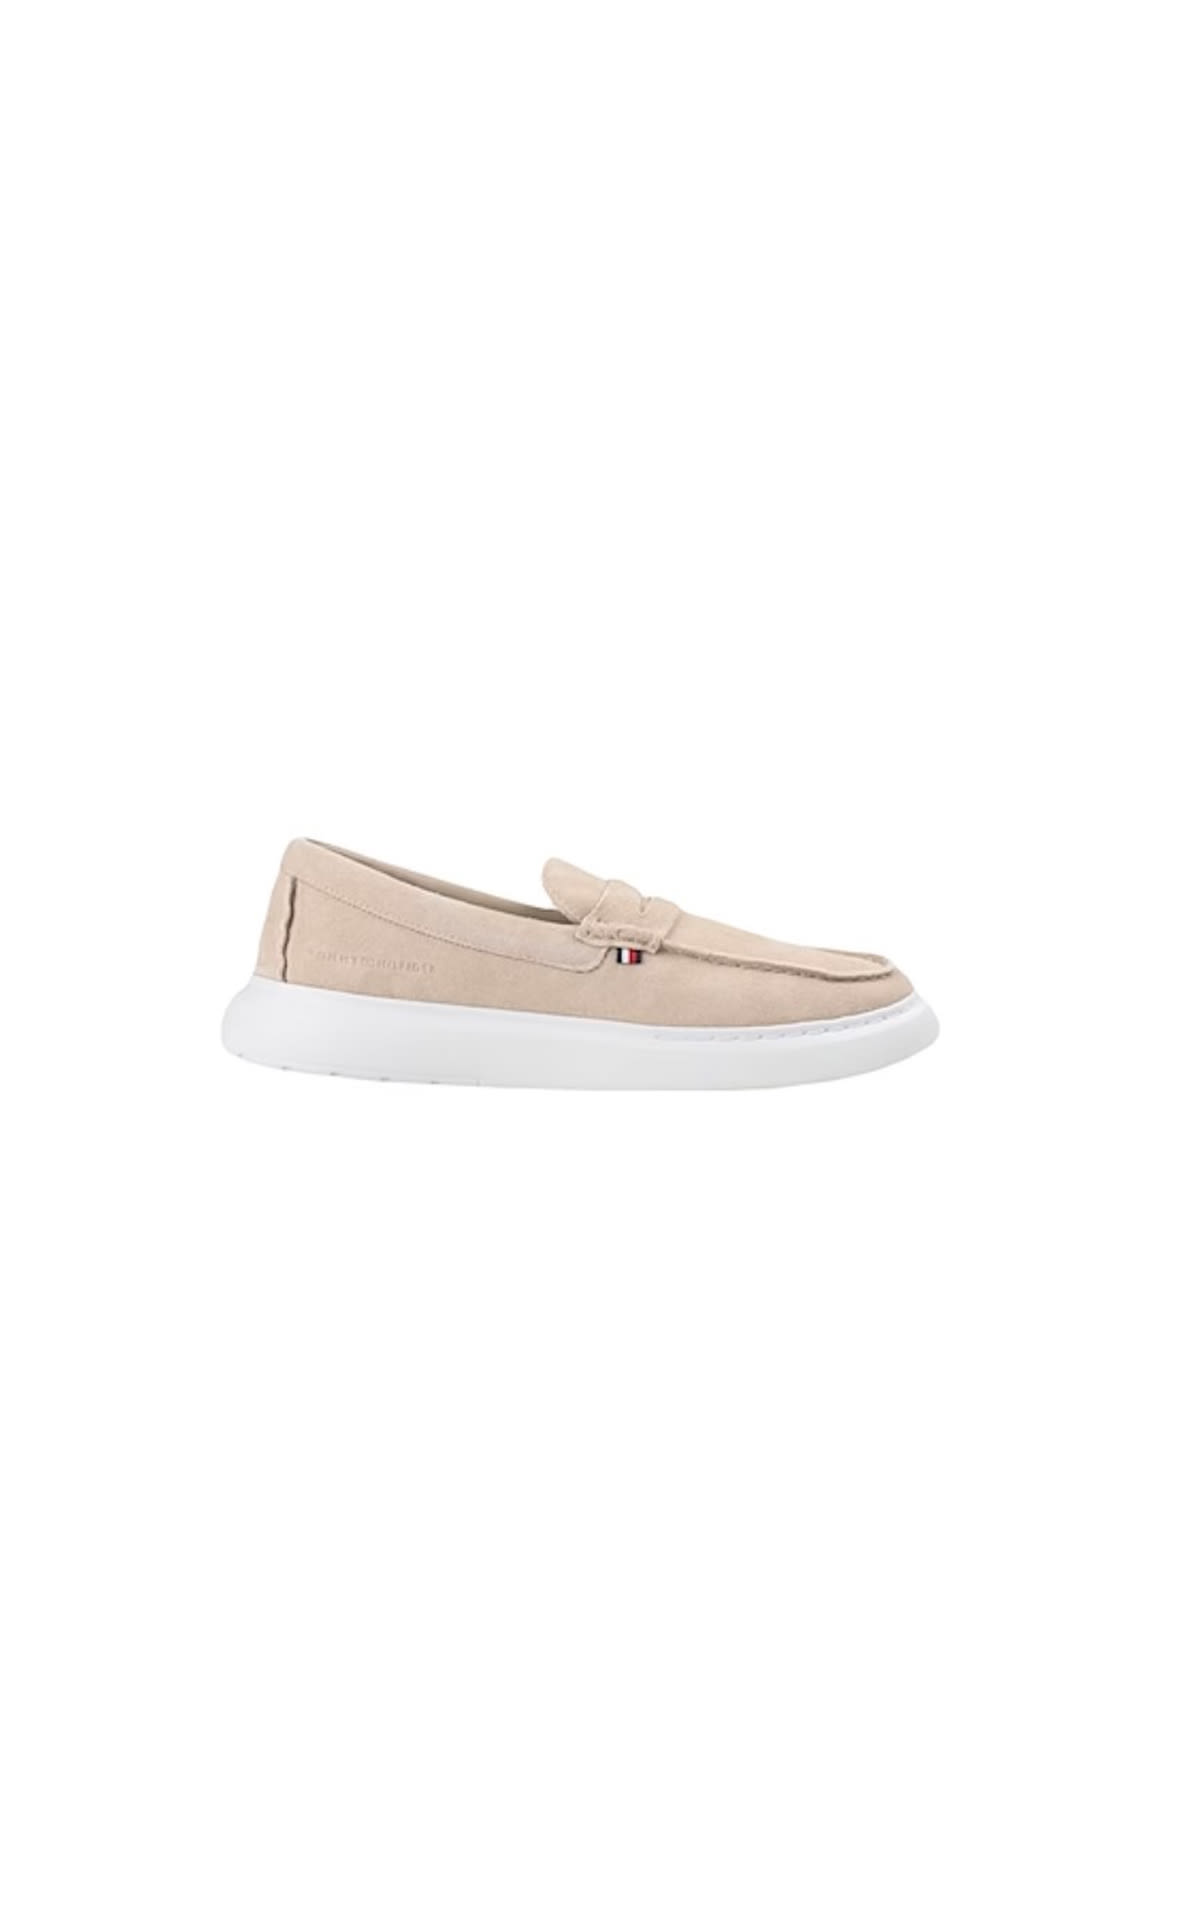 Tommy Hilfiger Classic loafers from Bicester Village